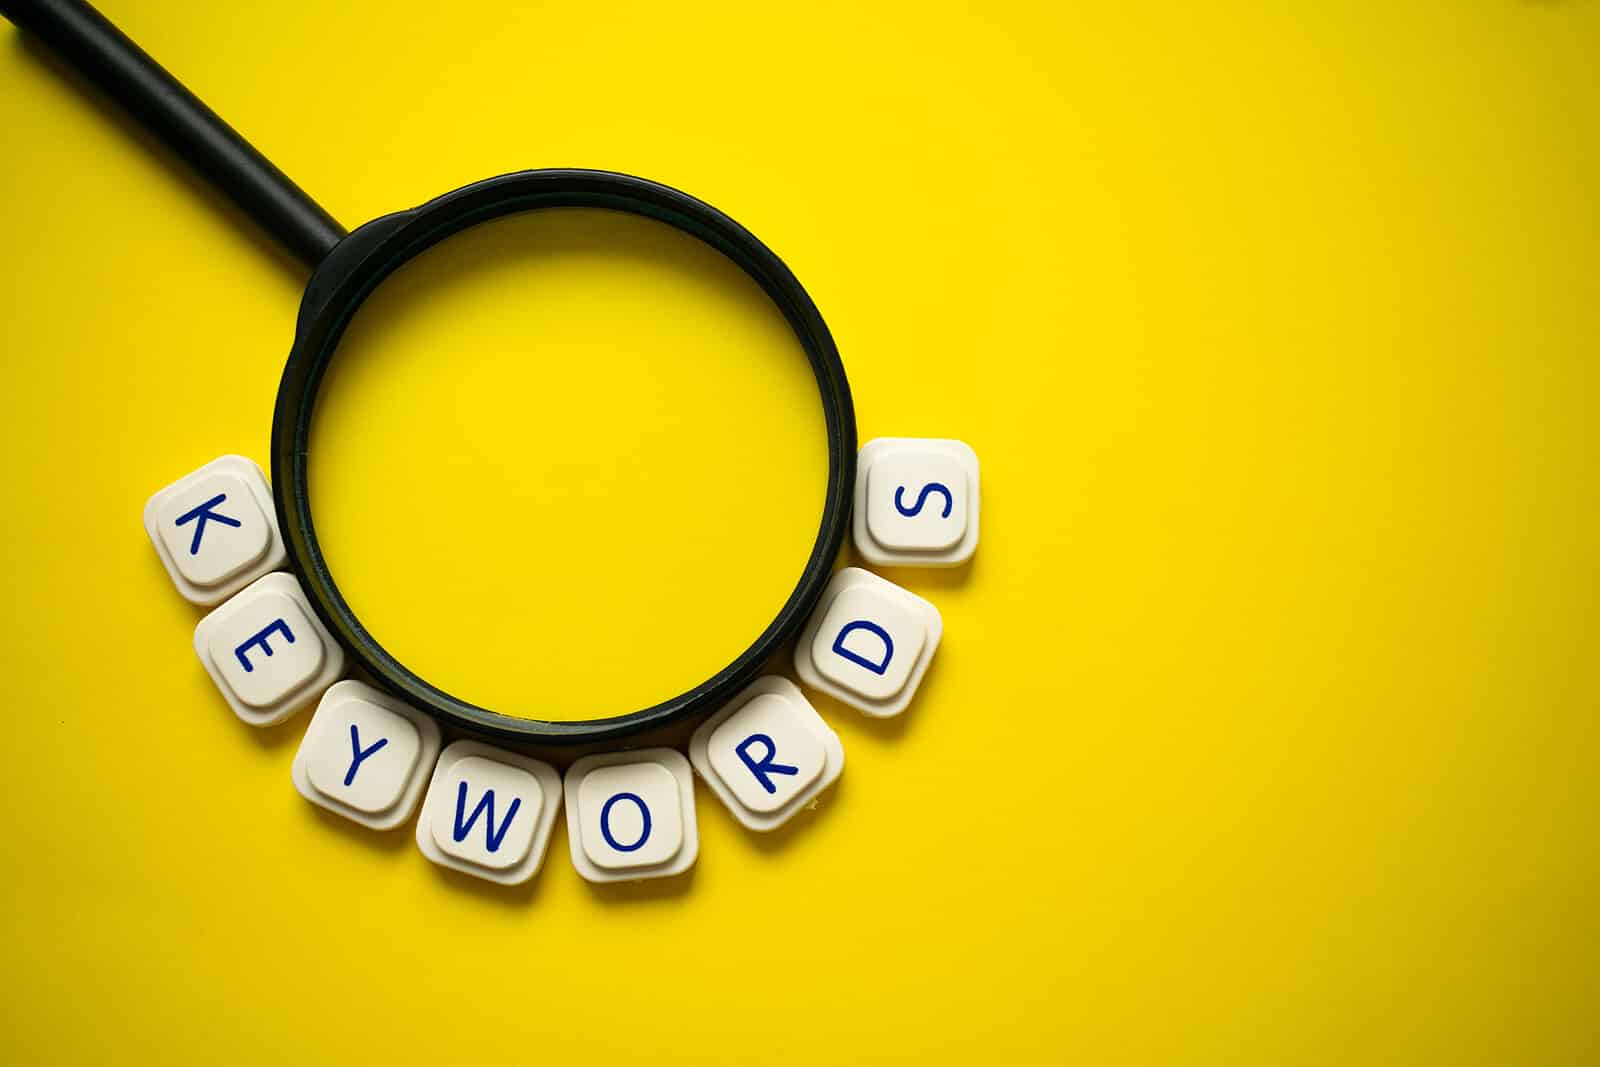 Letters spelling out keywords around a magnifying glass on a yellow background. Want to improve your healthcare SEO? We can help you understand local SEO for healthcare providers. Visit us today!